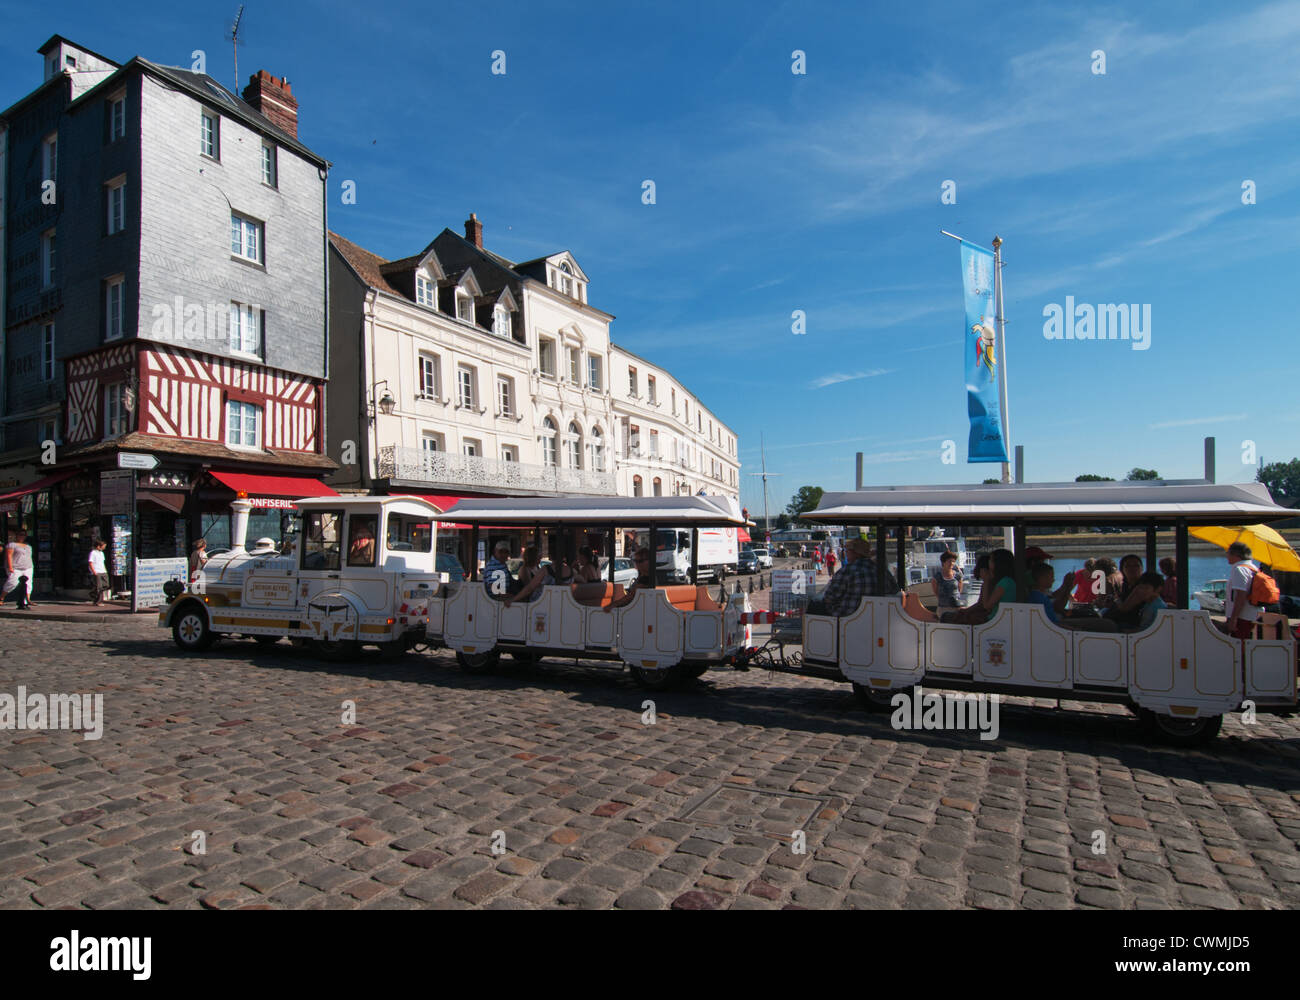 Sightseeing from the tourist train at Honfleur, Basse-Normandie, France. Stock Photo